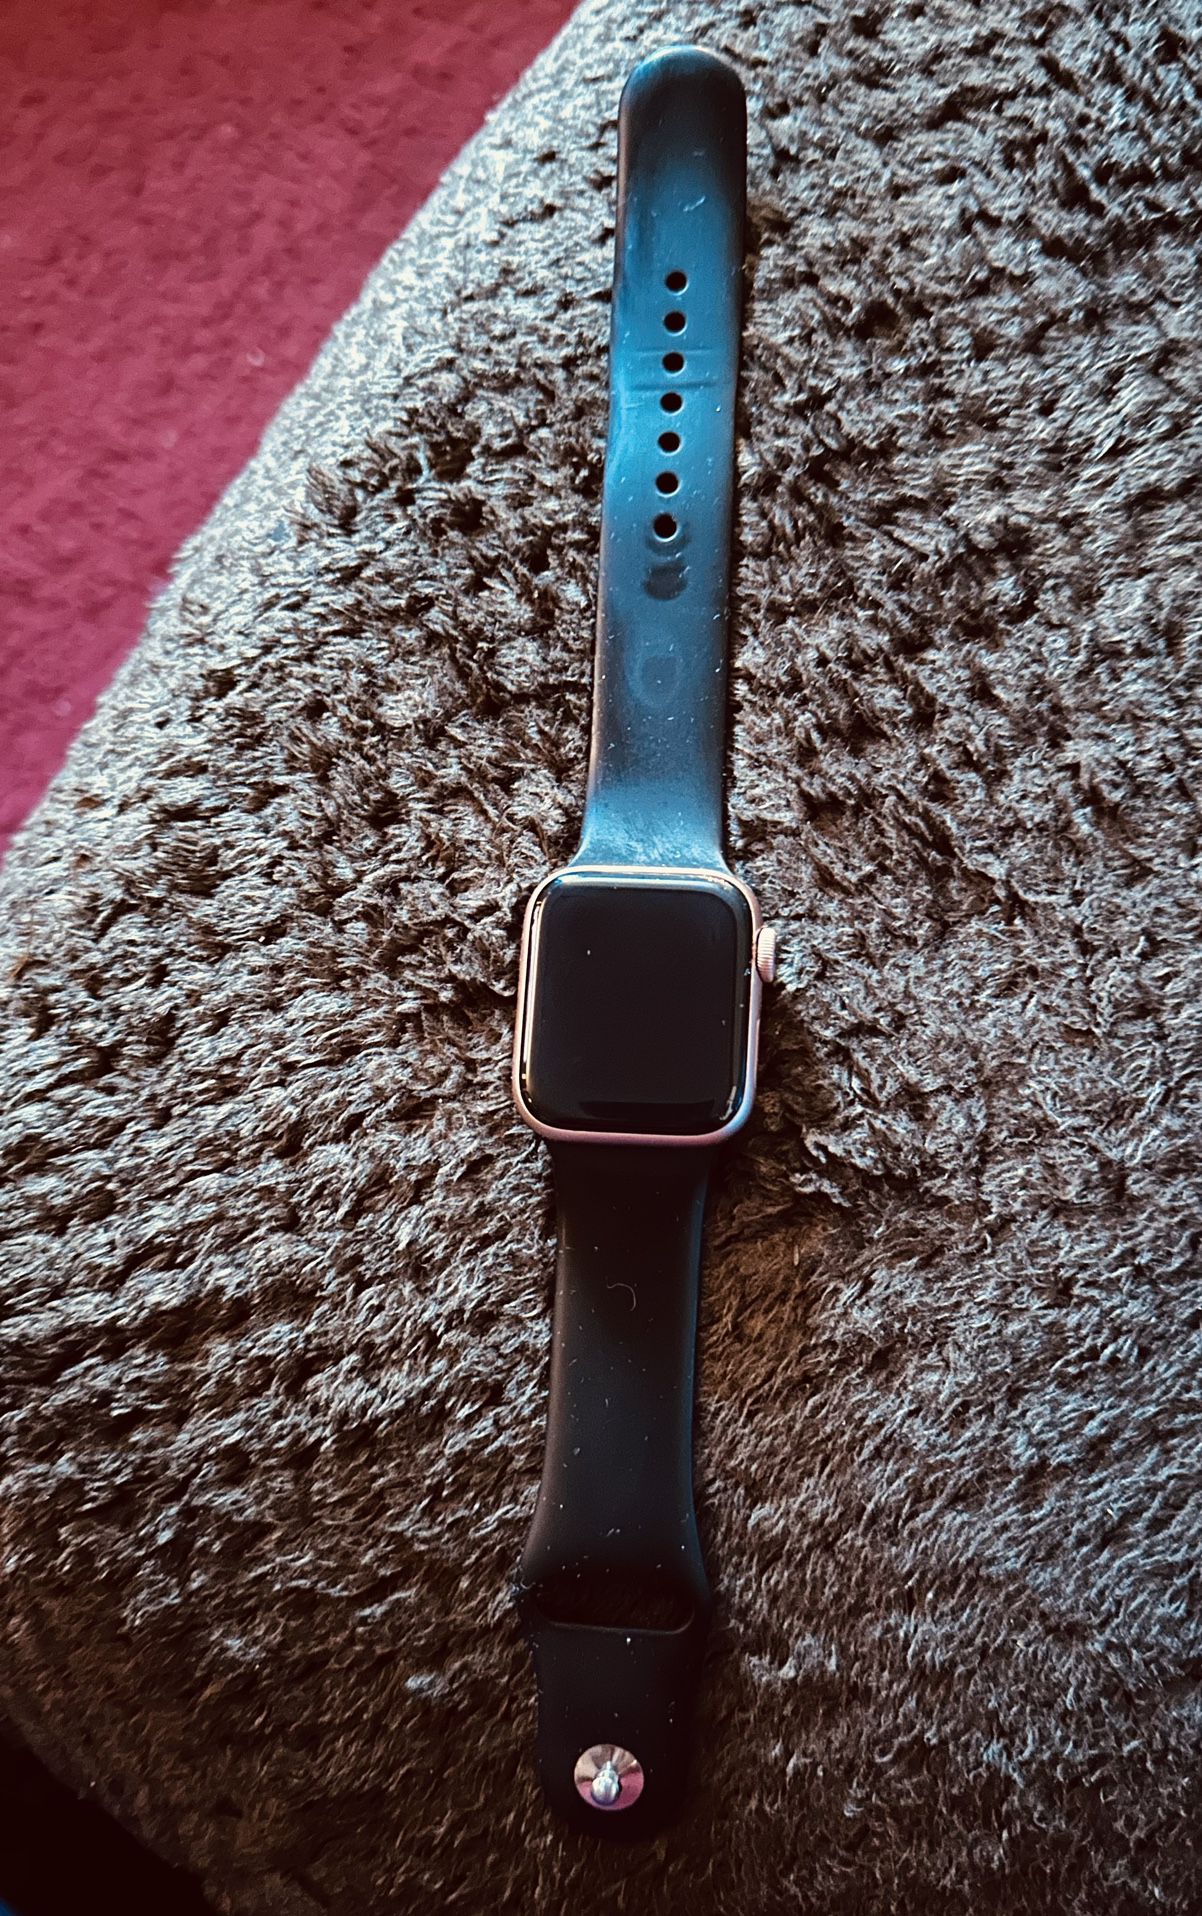 Apple Watch Series 4 With GPS and Cellular - Rose Gold